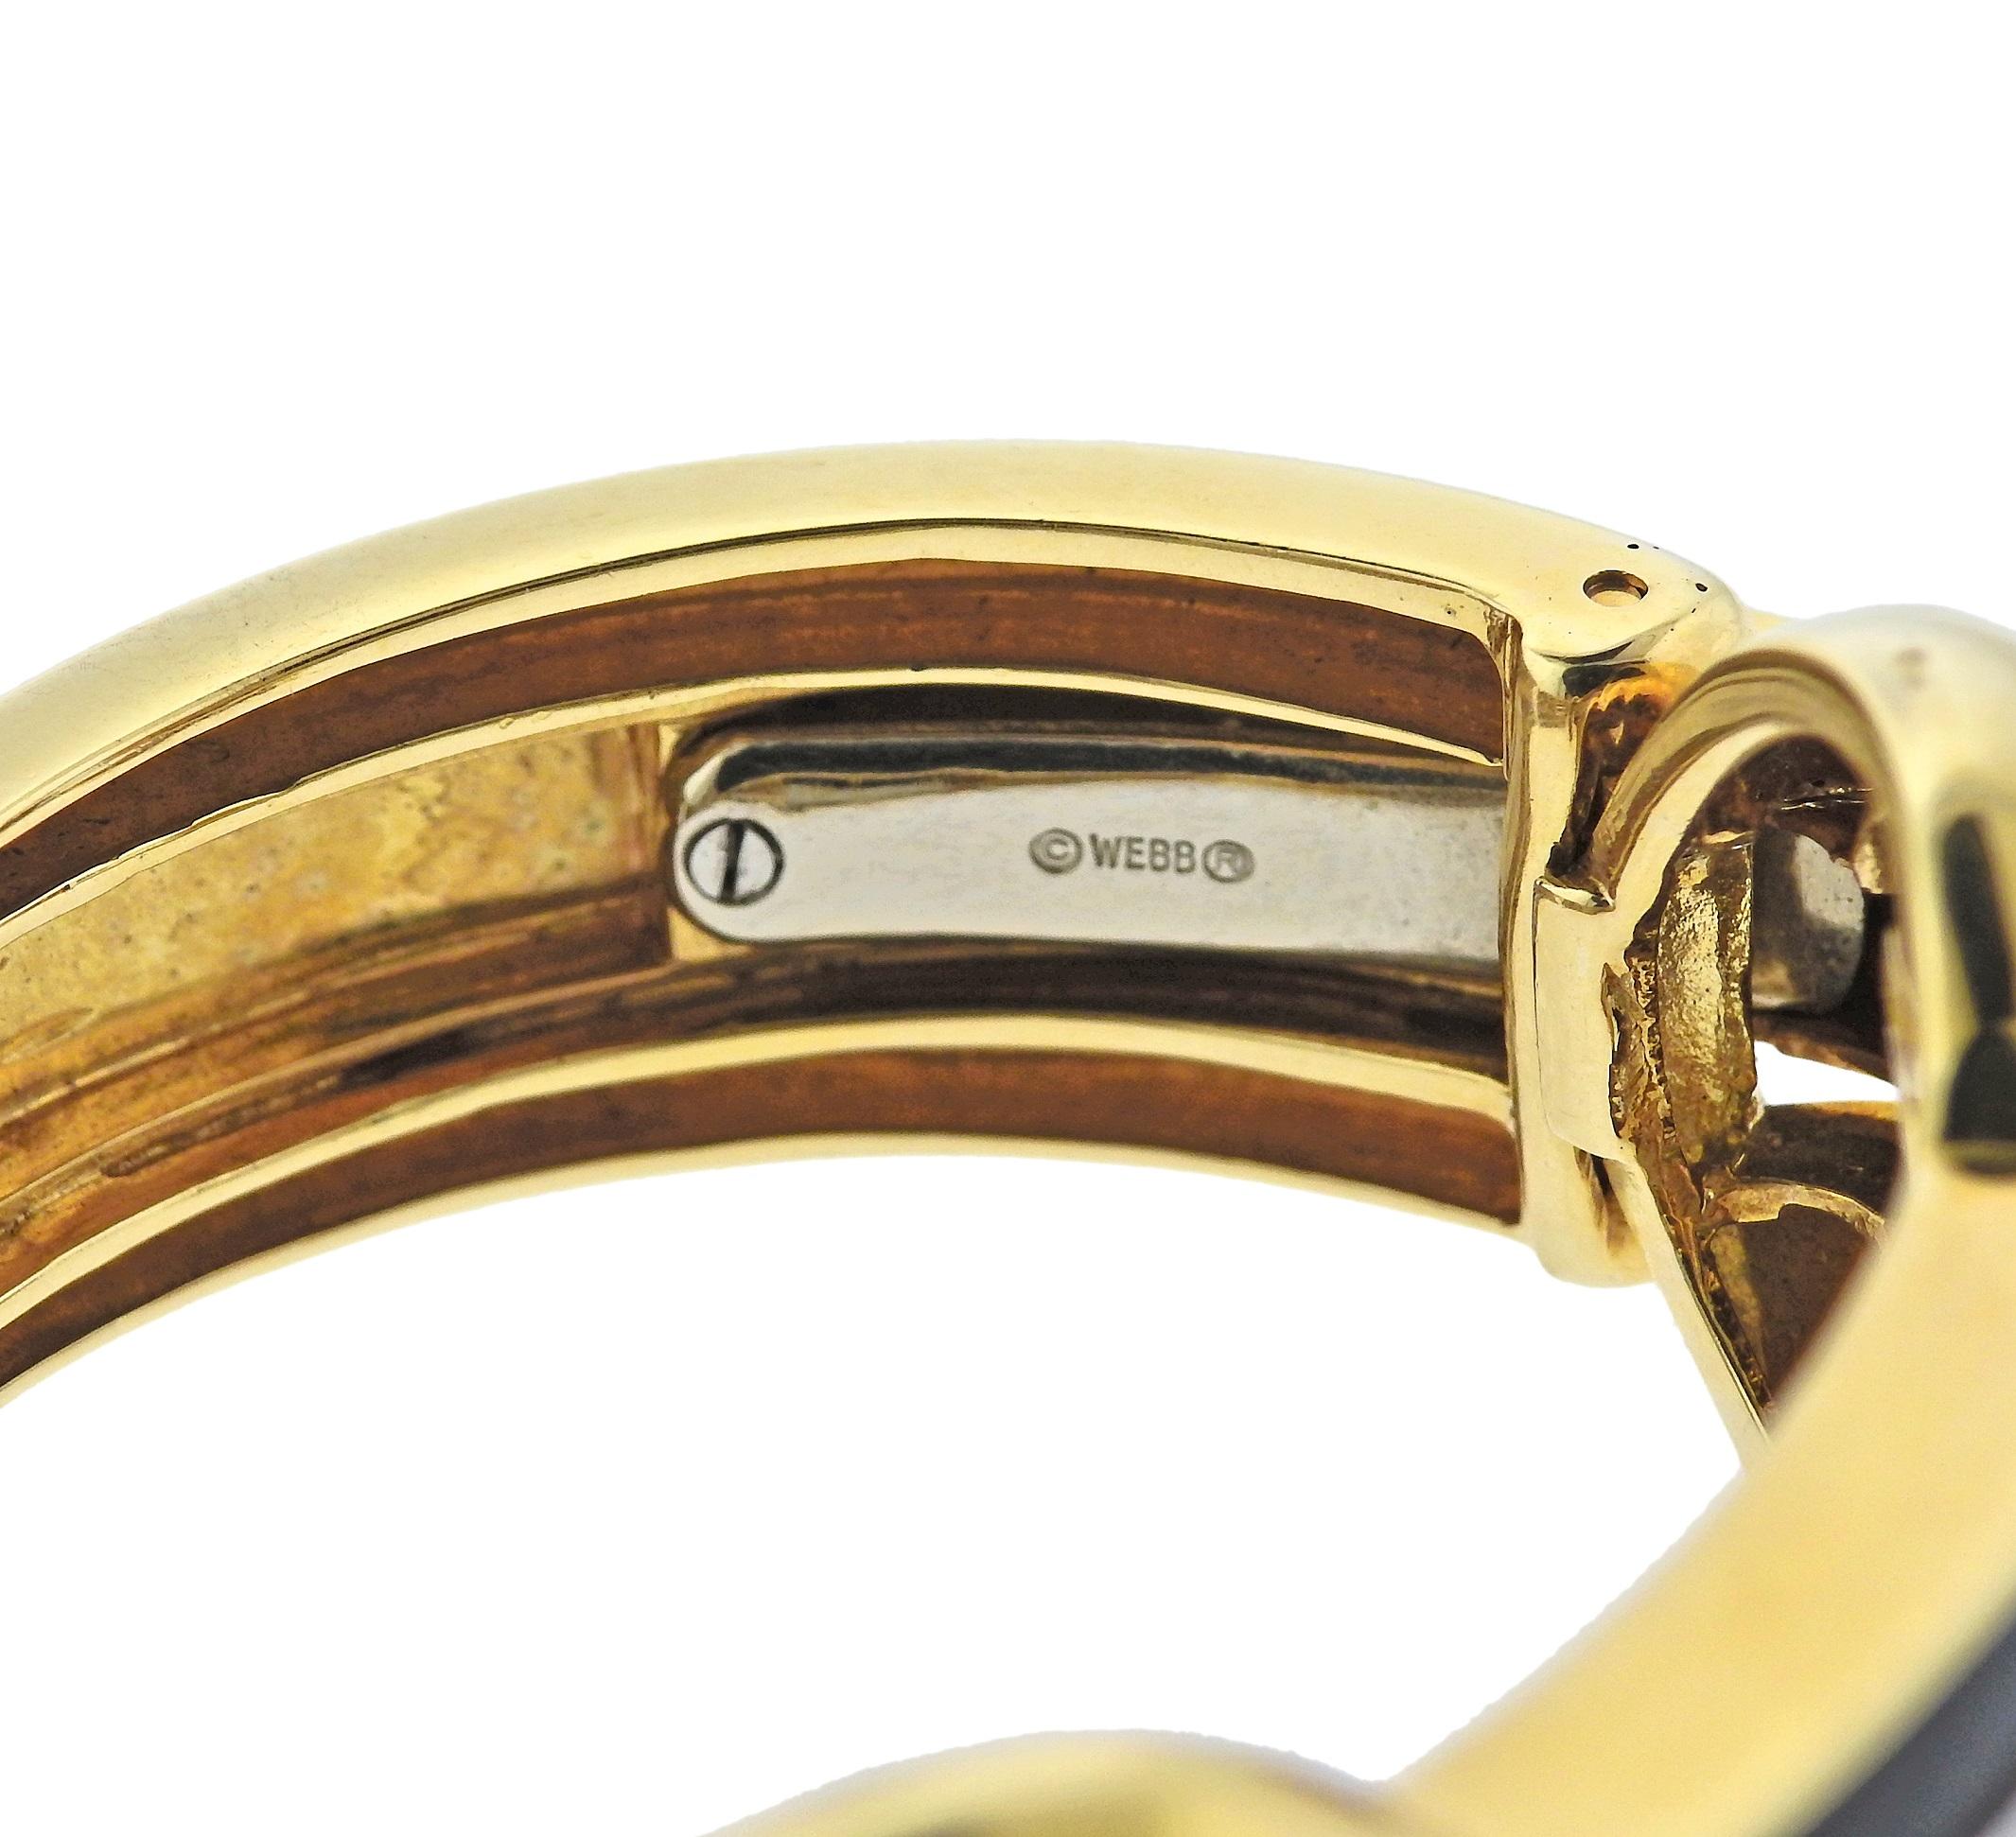 David Webb Brittle Cuff 18k gold and platinum bracelet, created for Manhattan Minimalism collection, set with approx. 3.00ctw in H/VS-SI1 diamonds. Current Retail $42000. Bracelet will comfortably fit up to 6.5